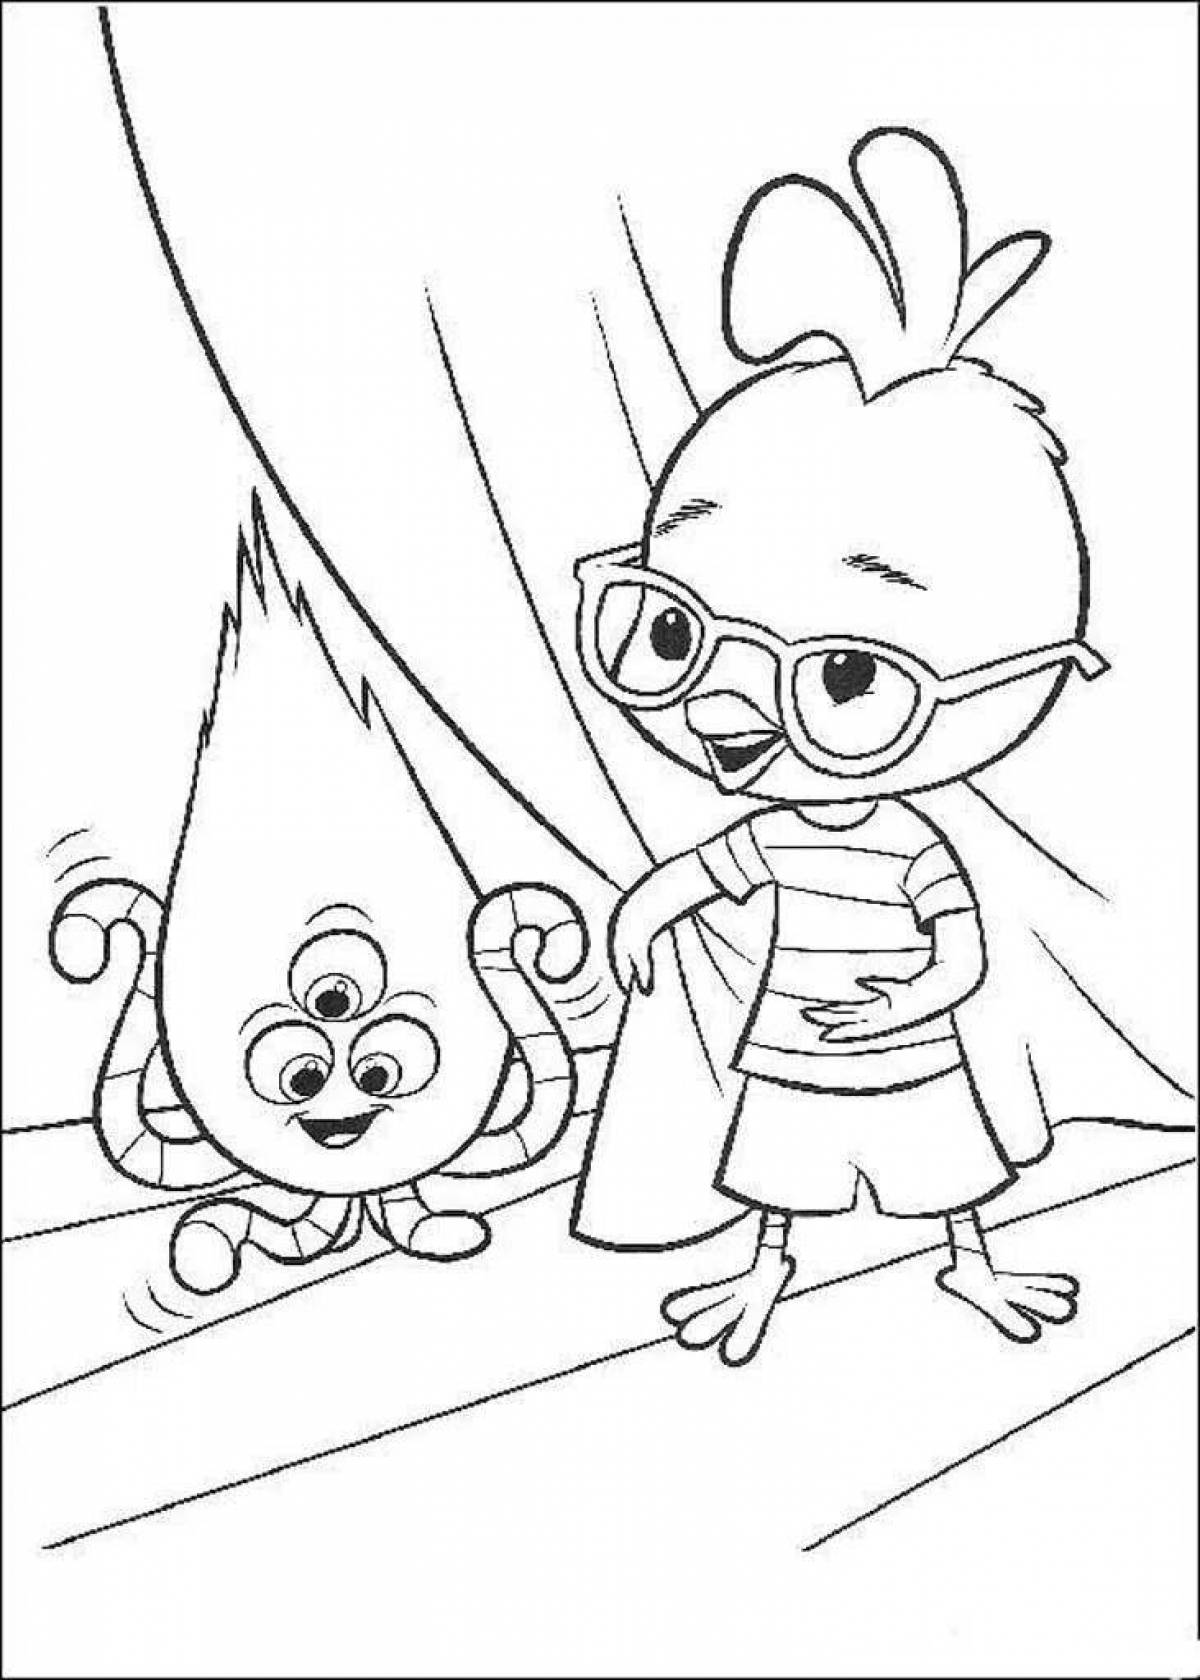 Blessed chicken coloring page